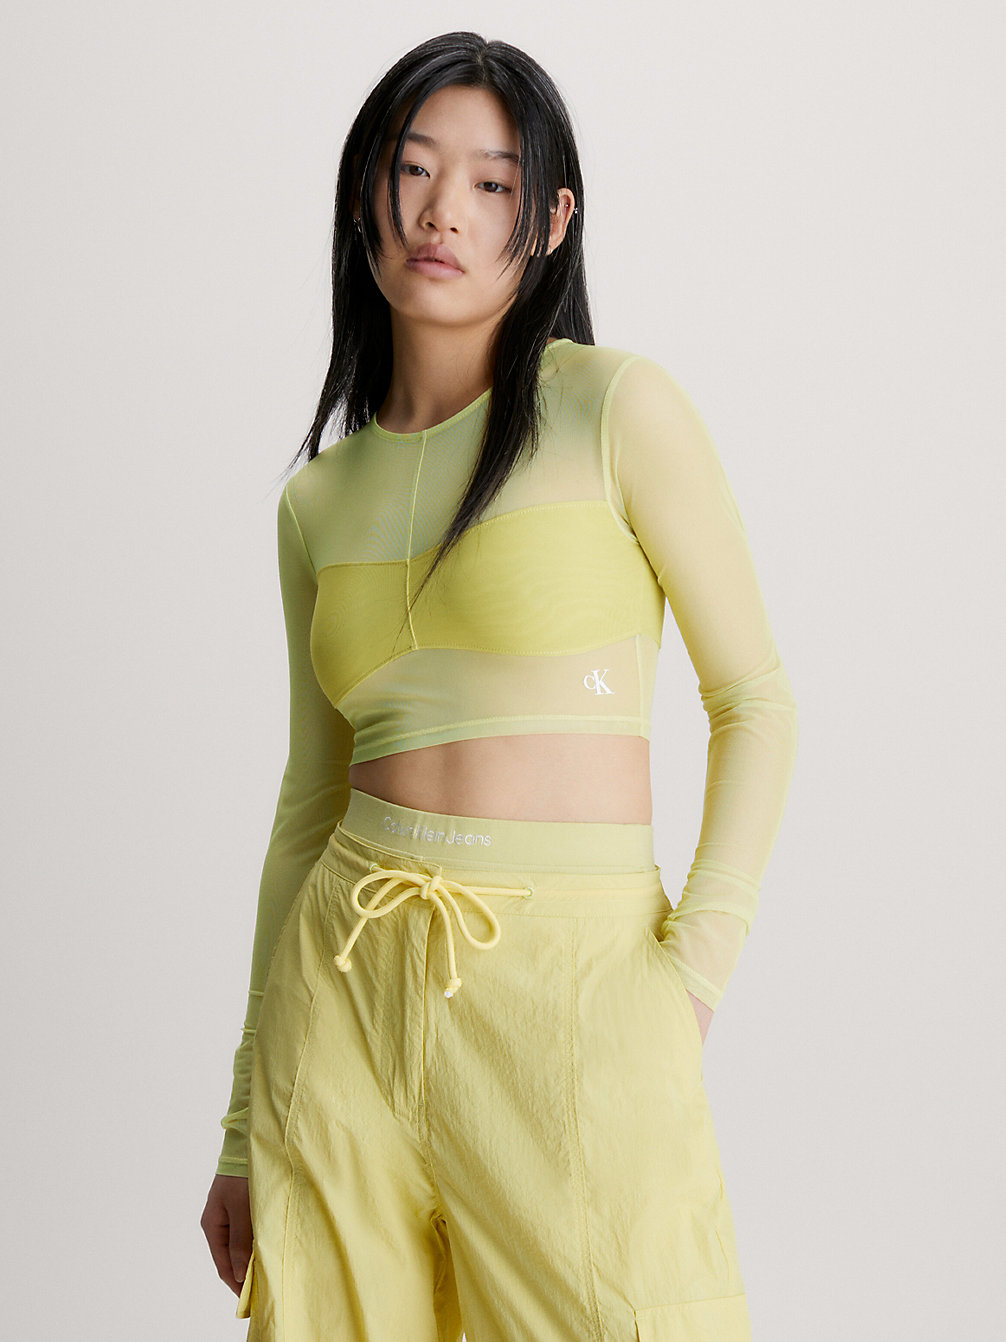 YELLOW SAND Mesh Long Sleeve Cropped Top undefined women Calvin Klein